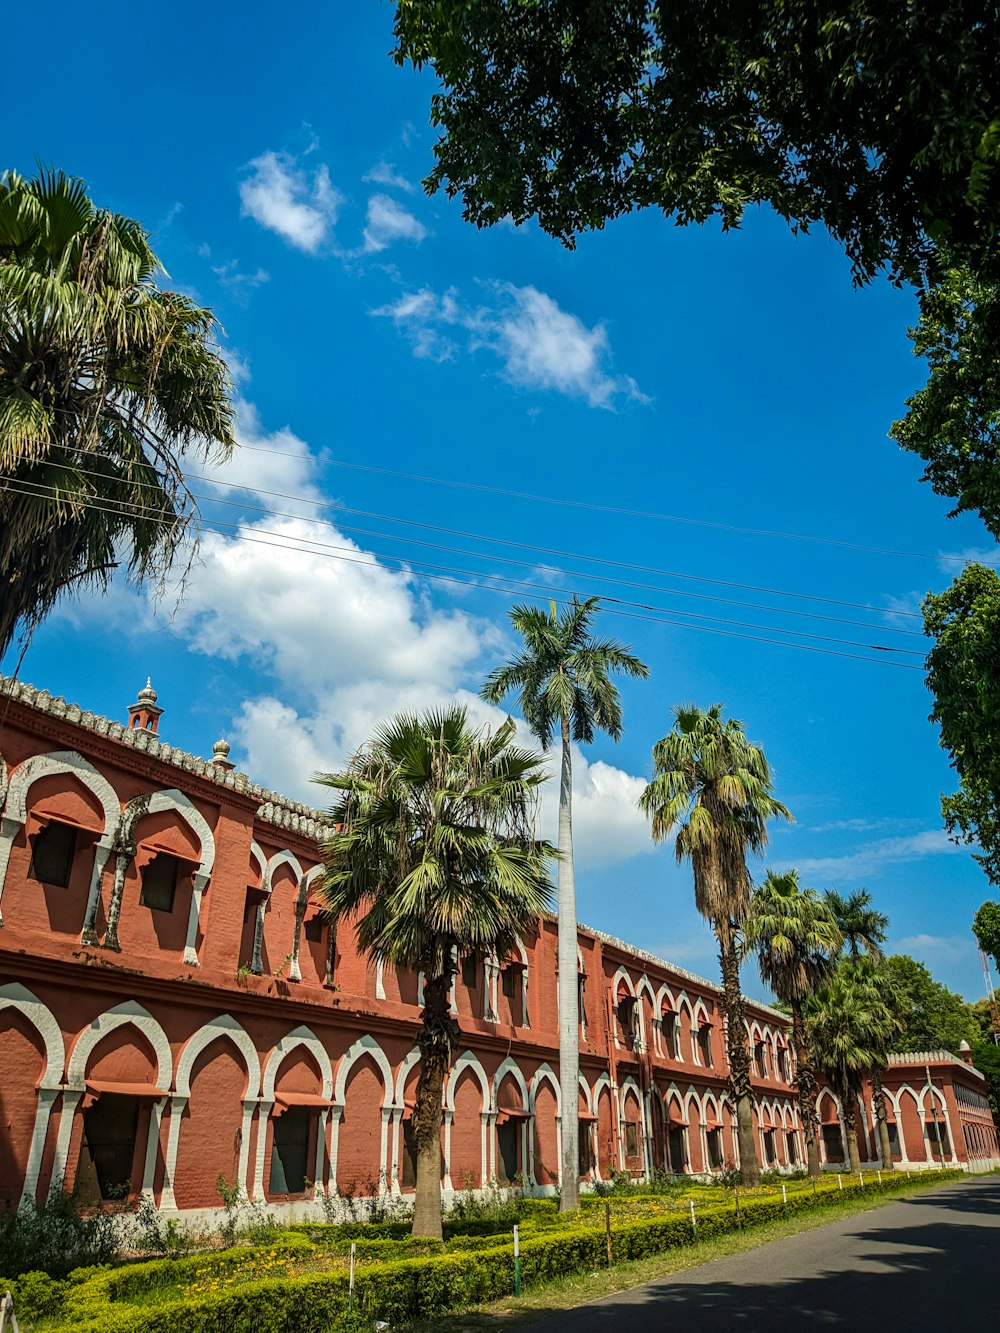 a red brick building surrounded by palm trees